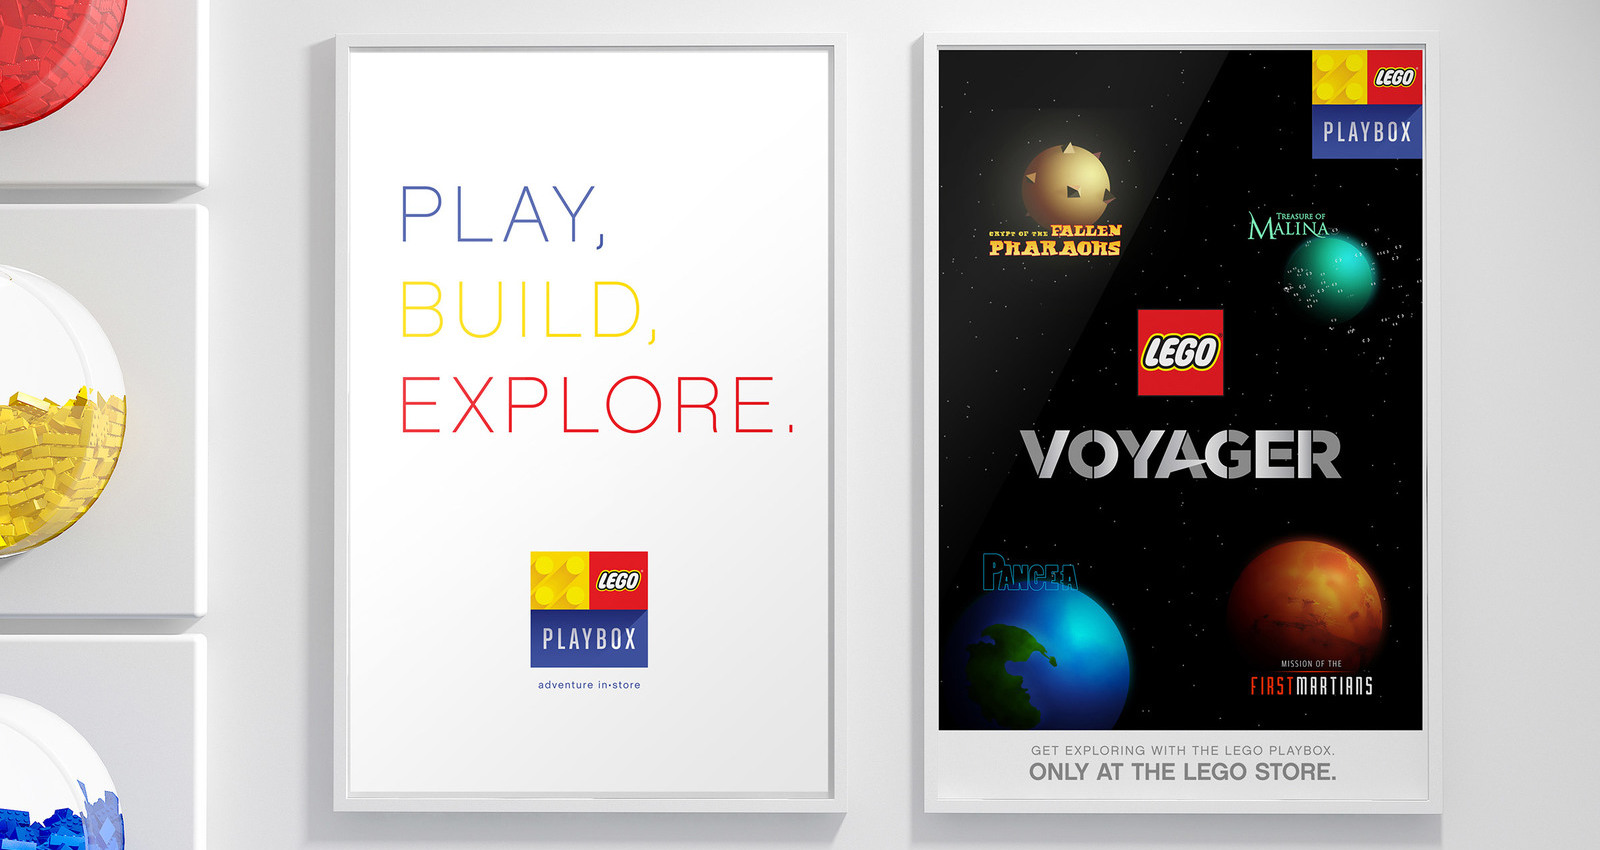 Lego PLaybox Collateral Design